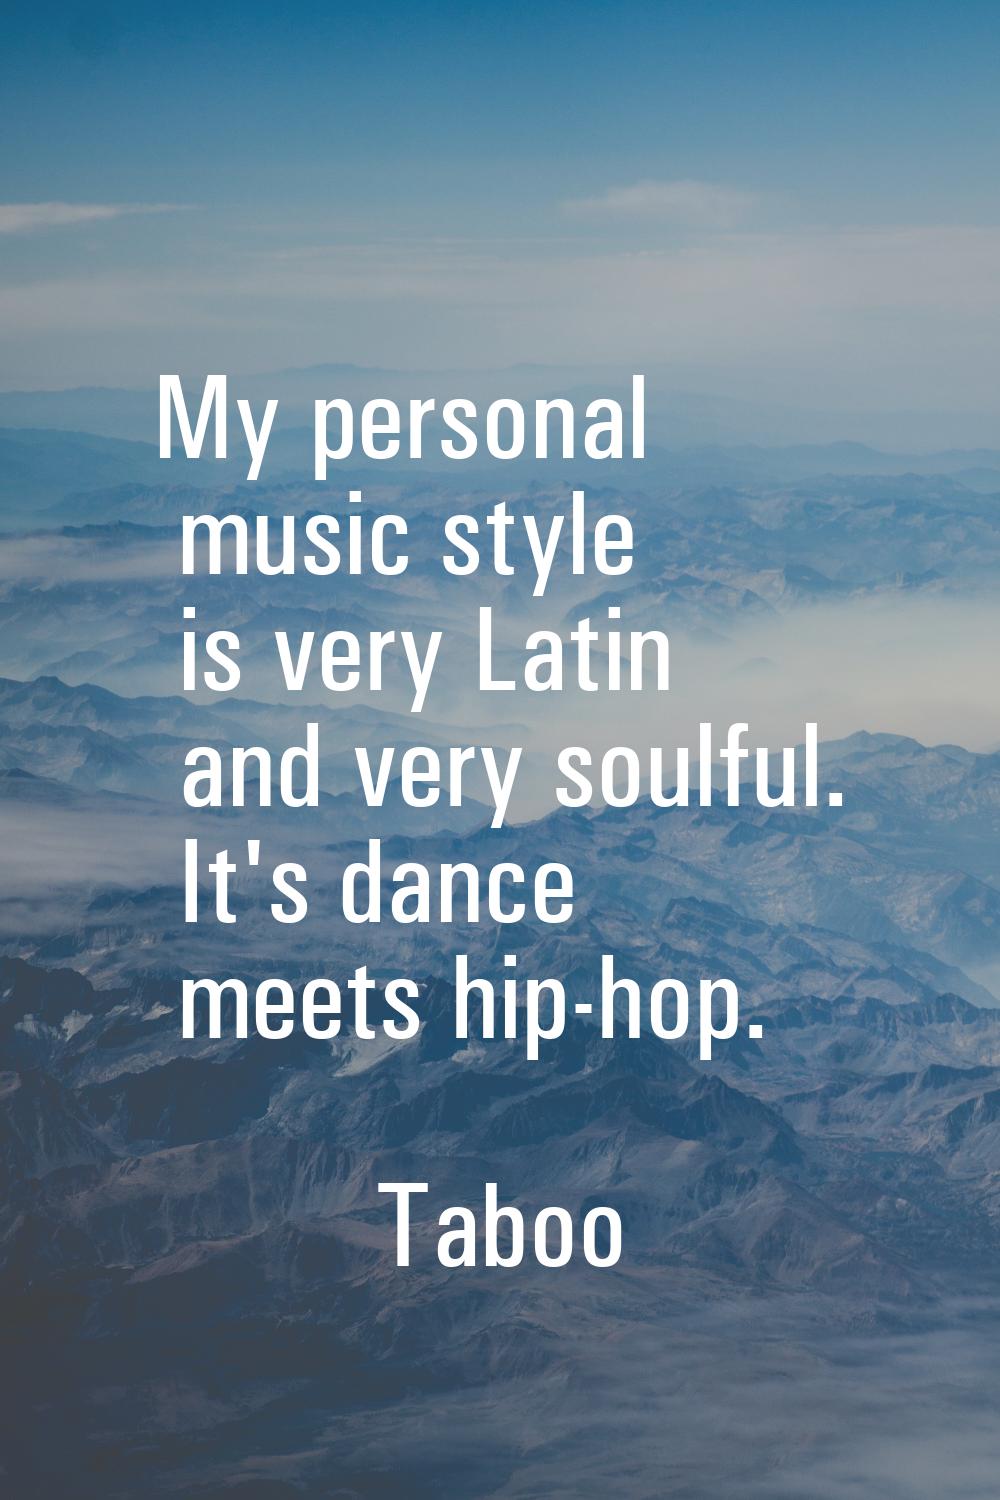 My personal music style is very Latin and very soulful. It's dance meets hip-hop.